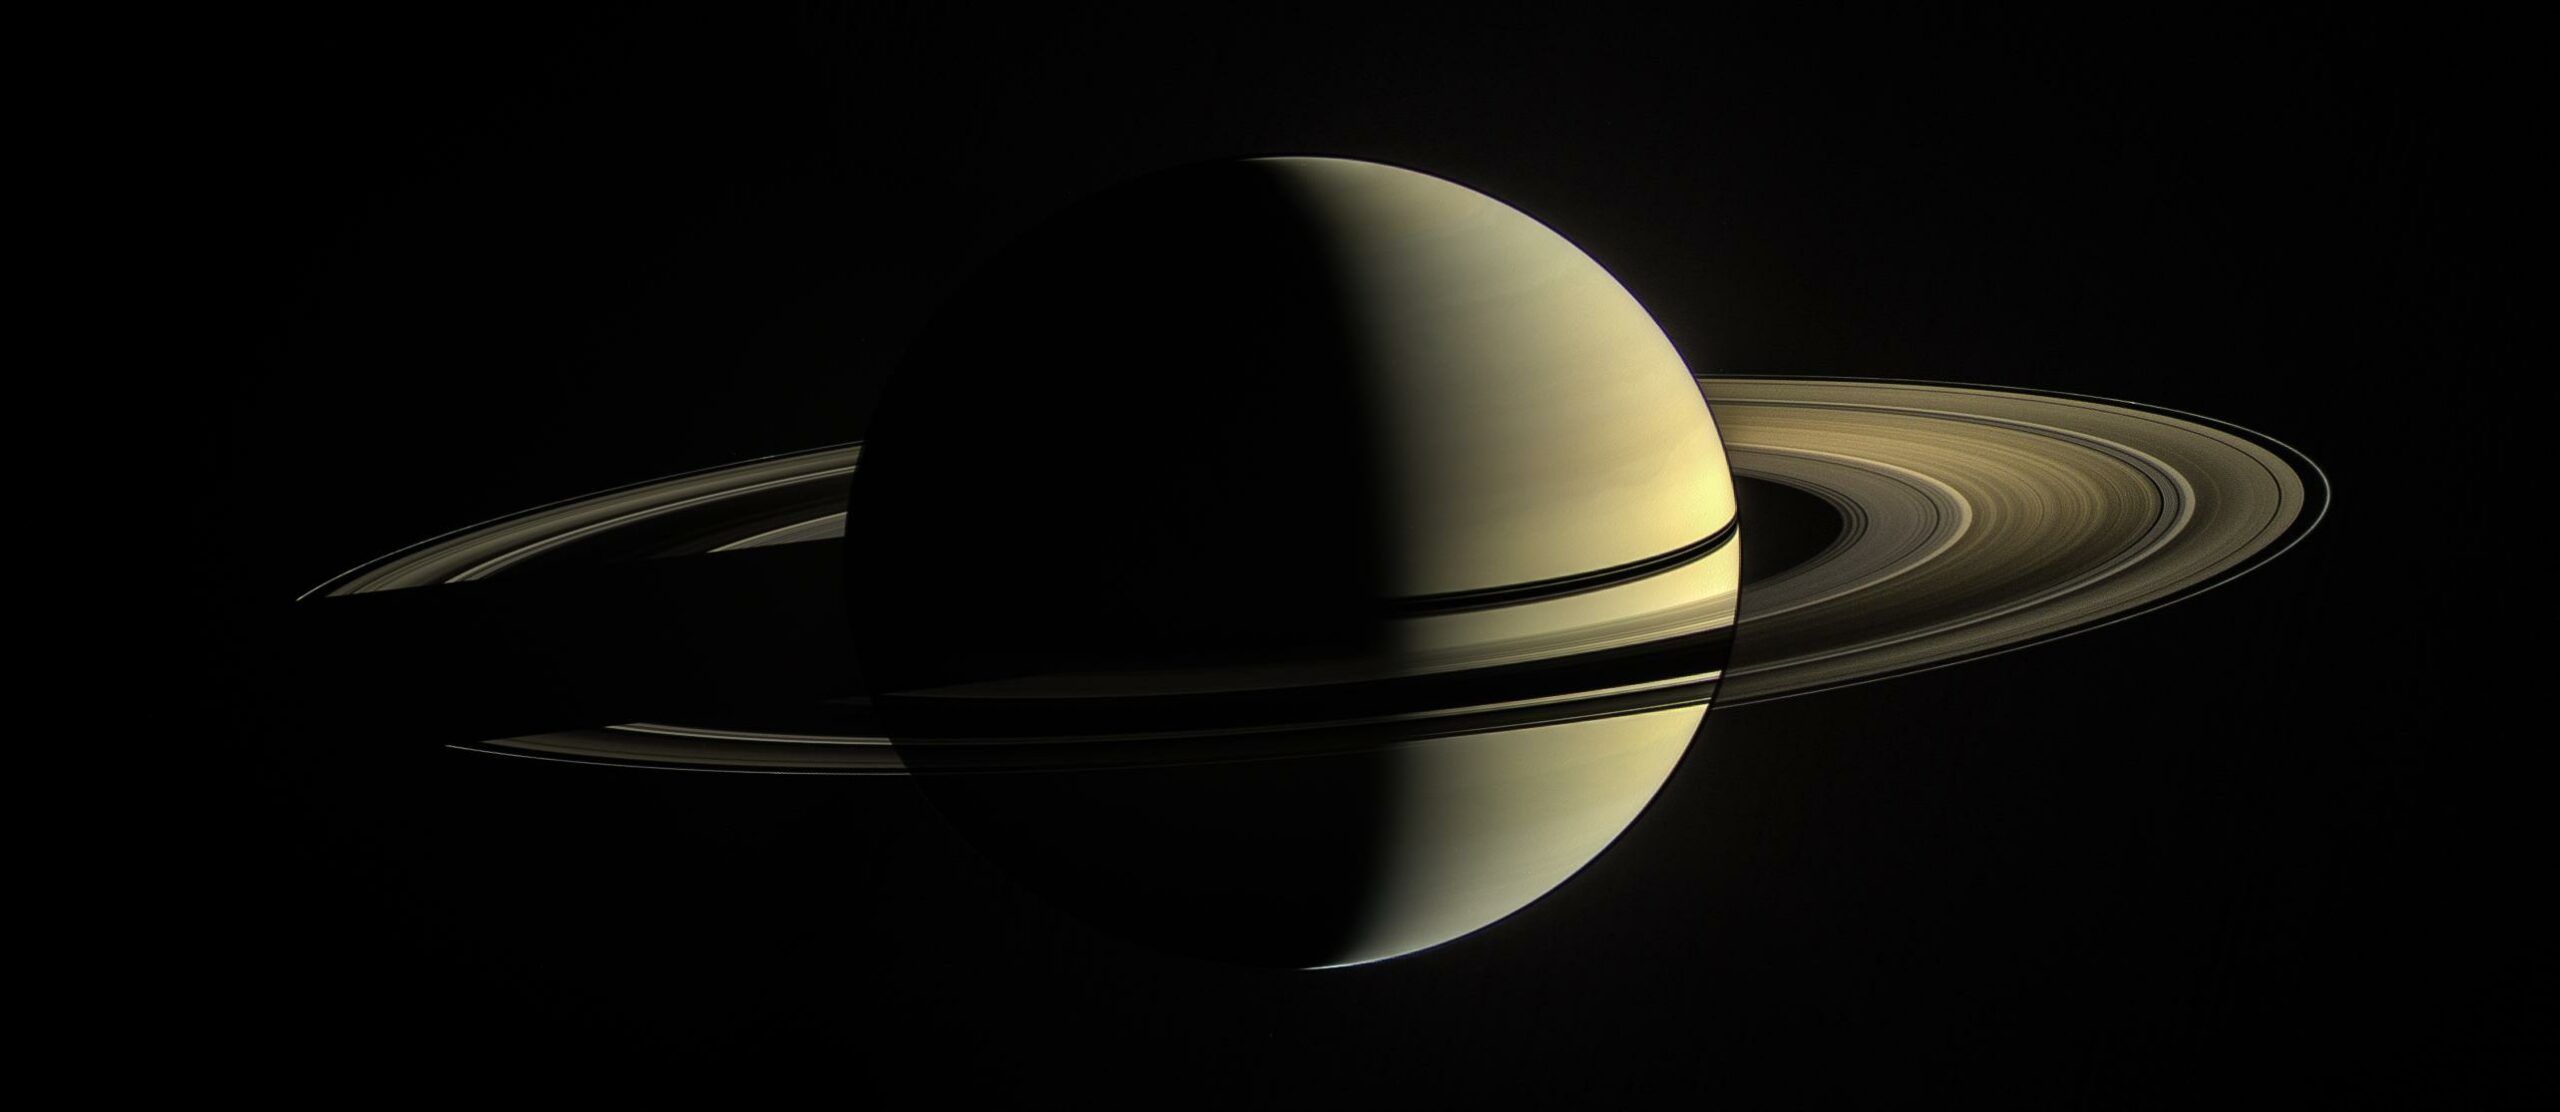 Saturn is ancient, but its rings are only as old as the dinosaurs